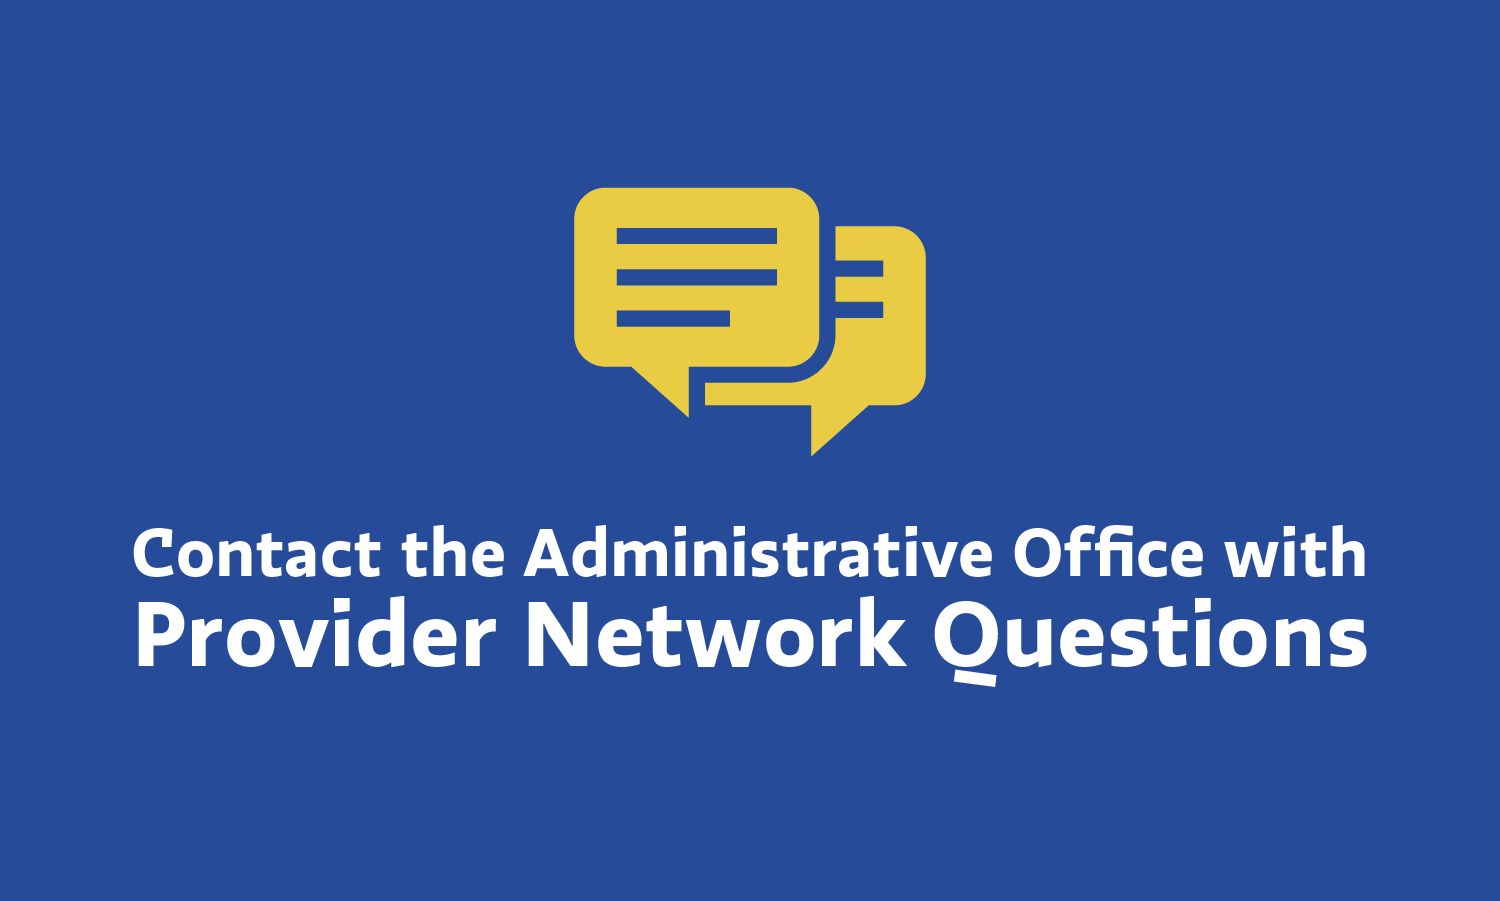 aetf news image provider network questions featured 1